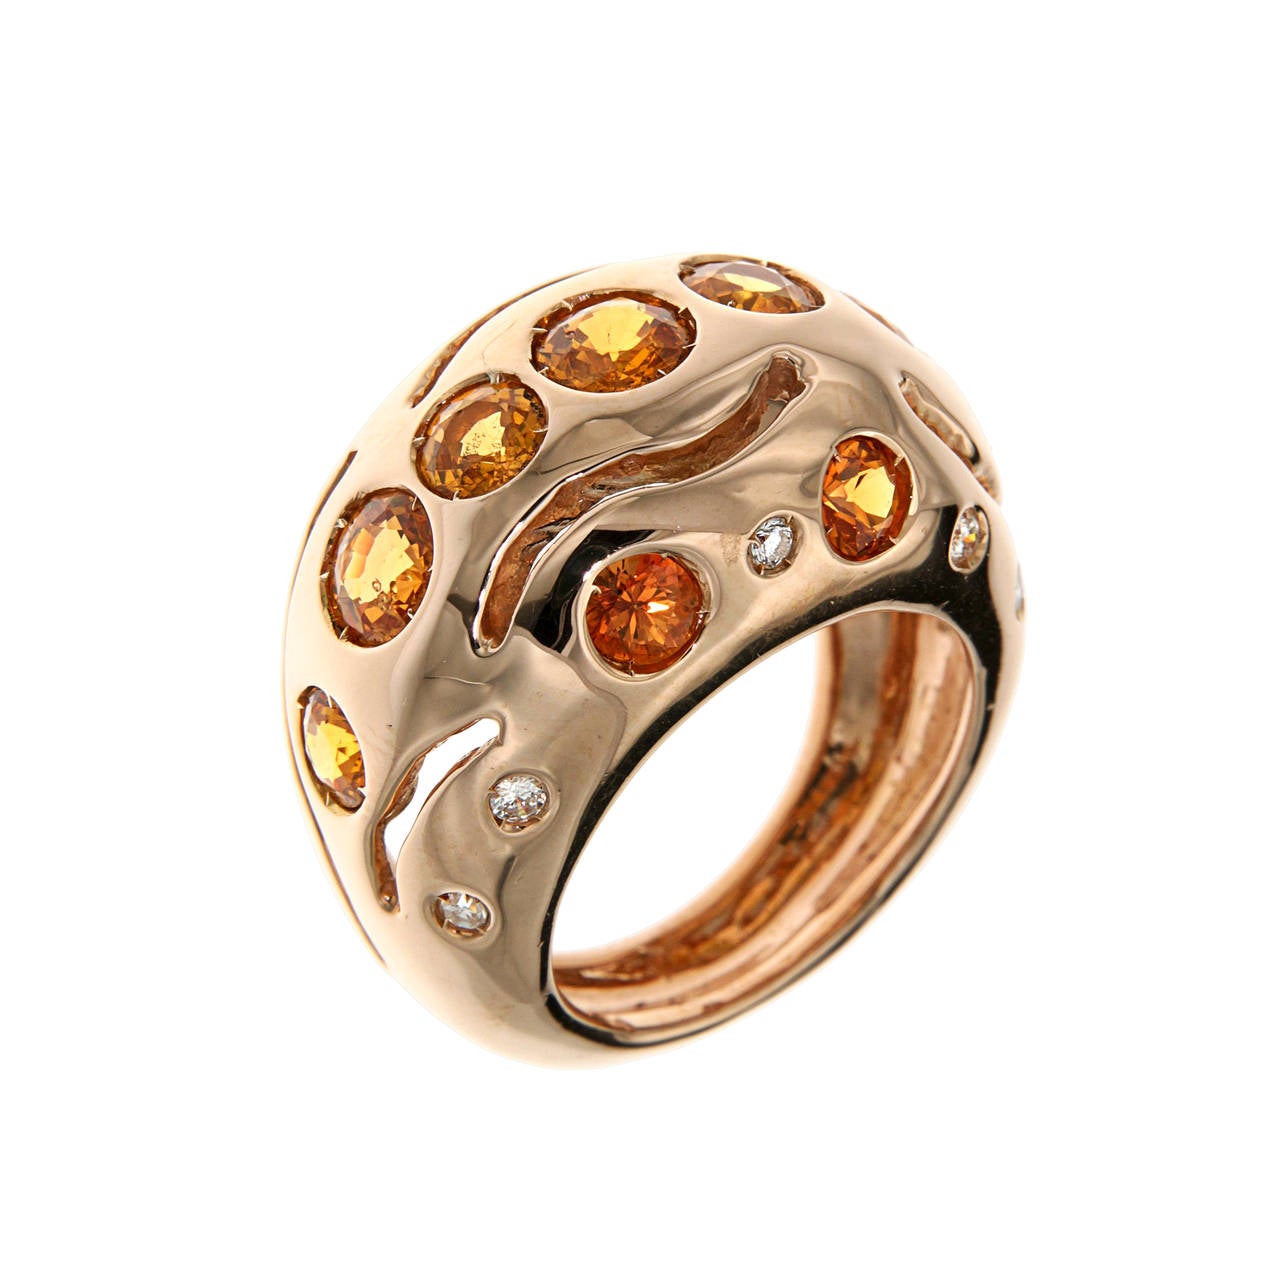 Orange Sapphires Diamonds Rose Gold Cocktail Ring Handcrafted In Italy For Sale